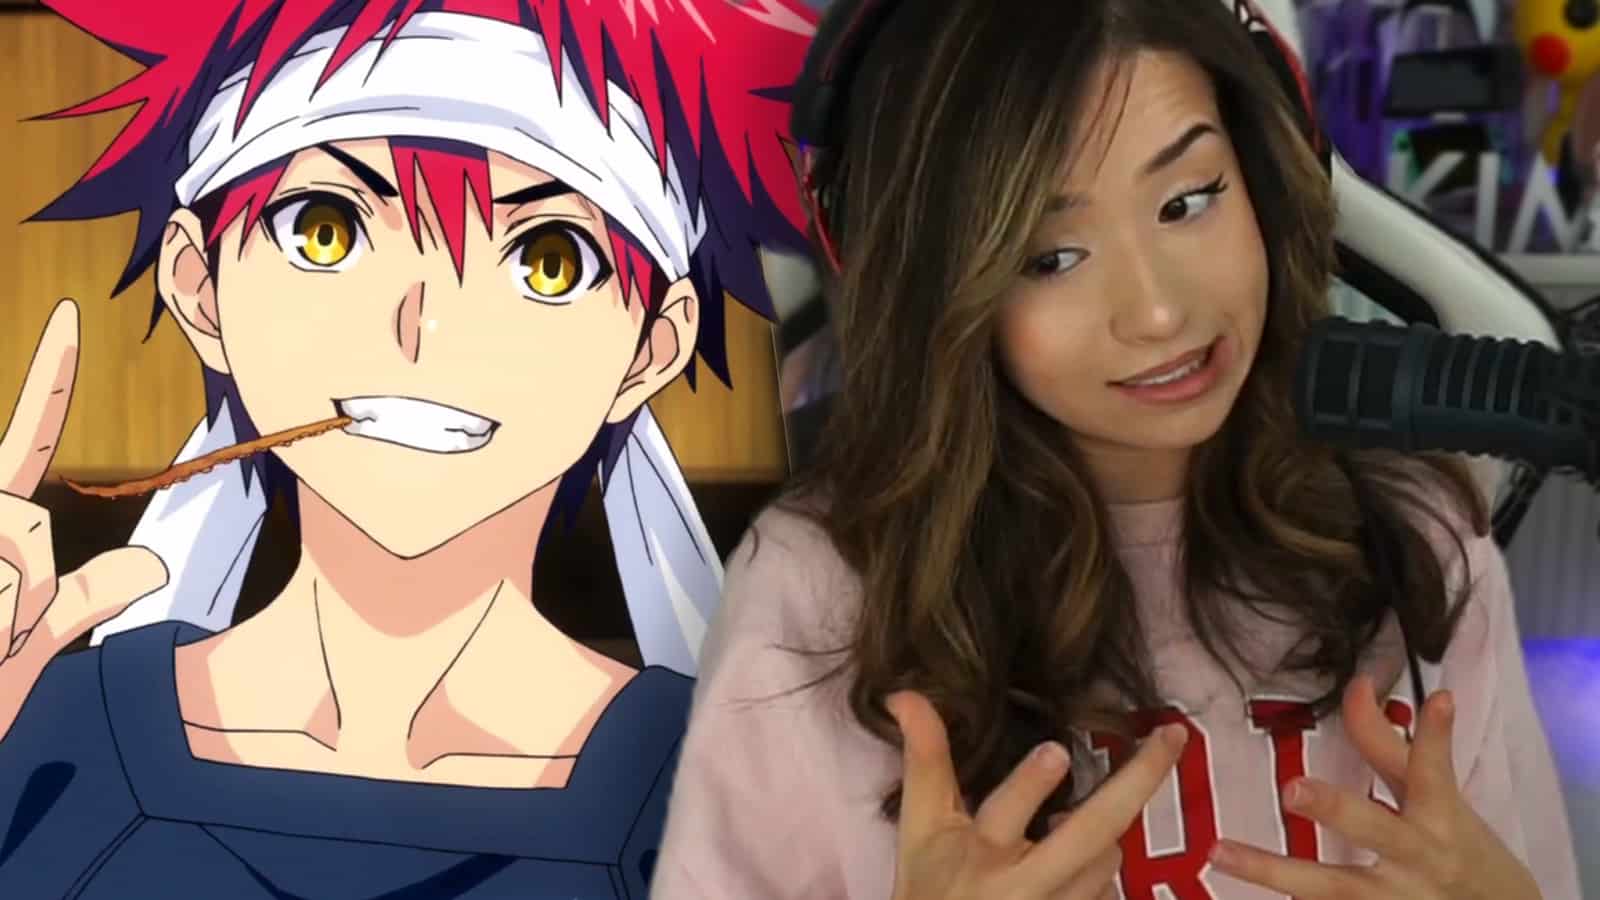 Pokimane learns why watching anime on Twitch is huge mistake after nudity  scare - Dexerto